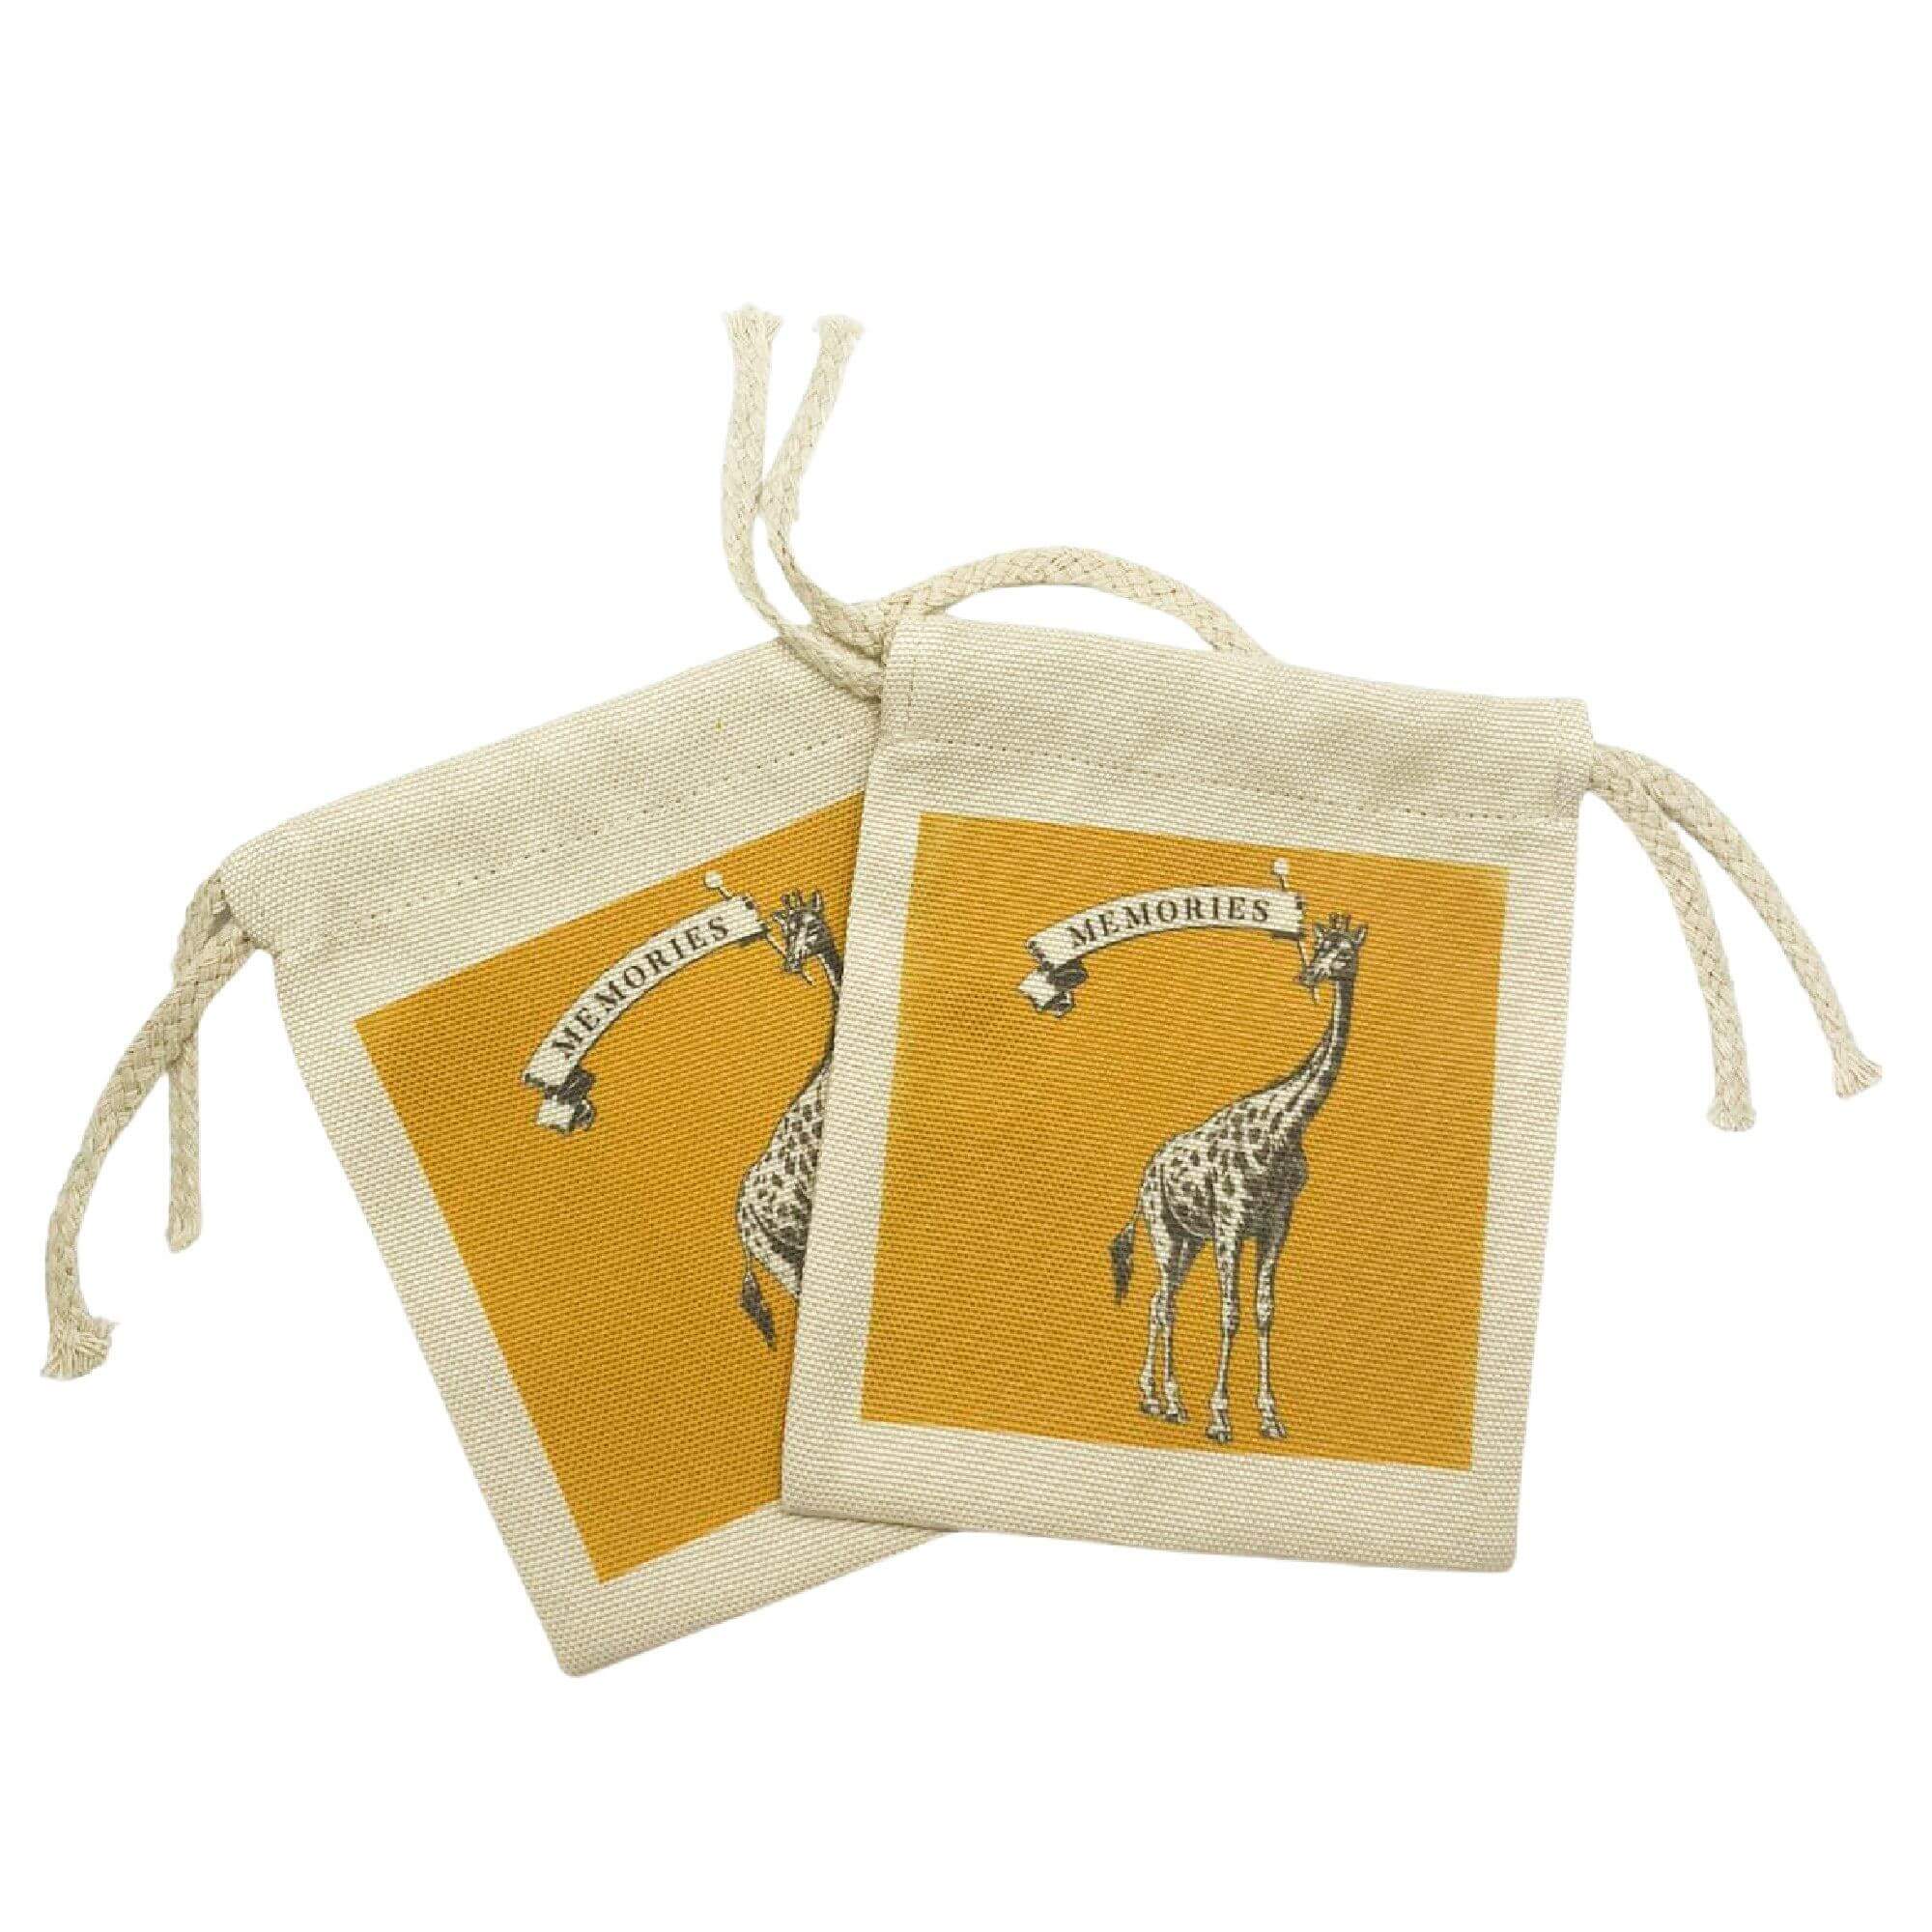 Birthday Parade Time Capsule (First Birthday) set from Mustard and Gray. Printed keepsake tin with cards and memorys bag. Time Capsule Gift Set